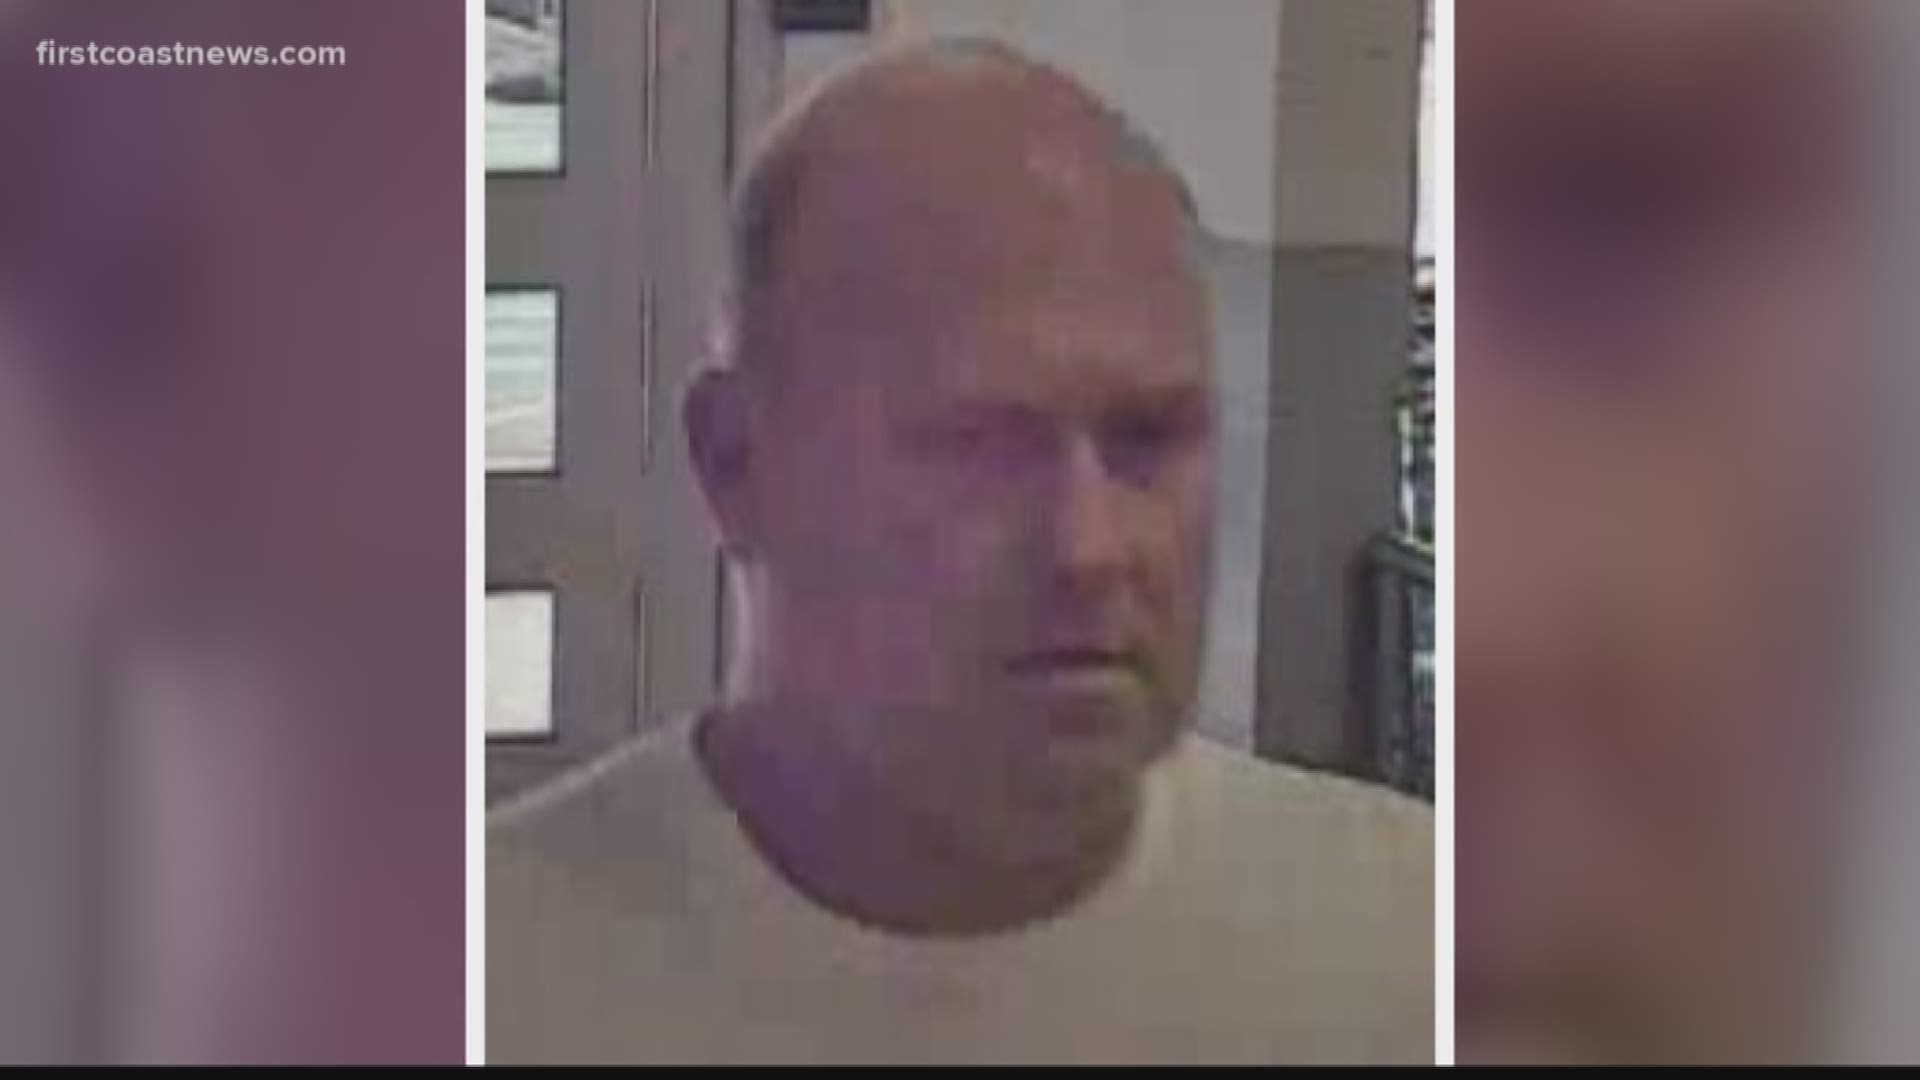 If you recognize the man, call SJSO at 904-209-2142.